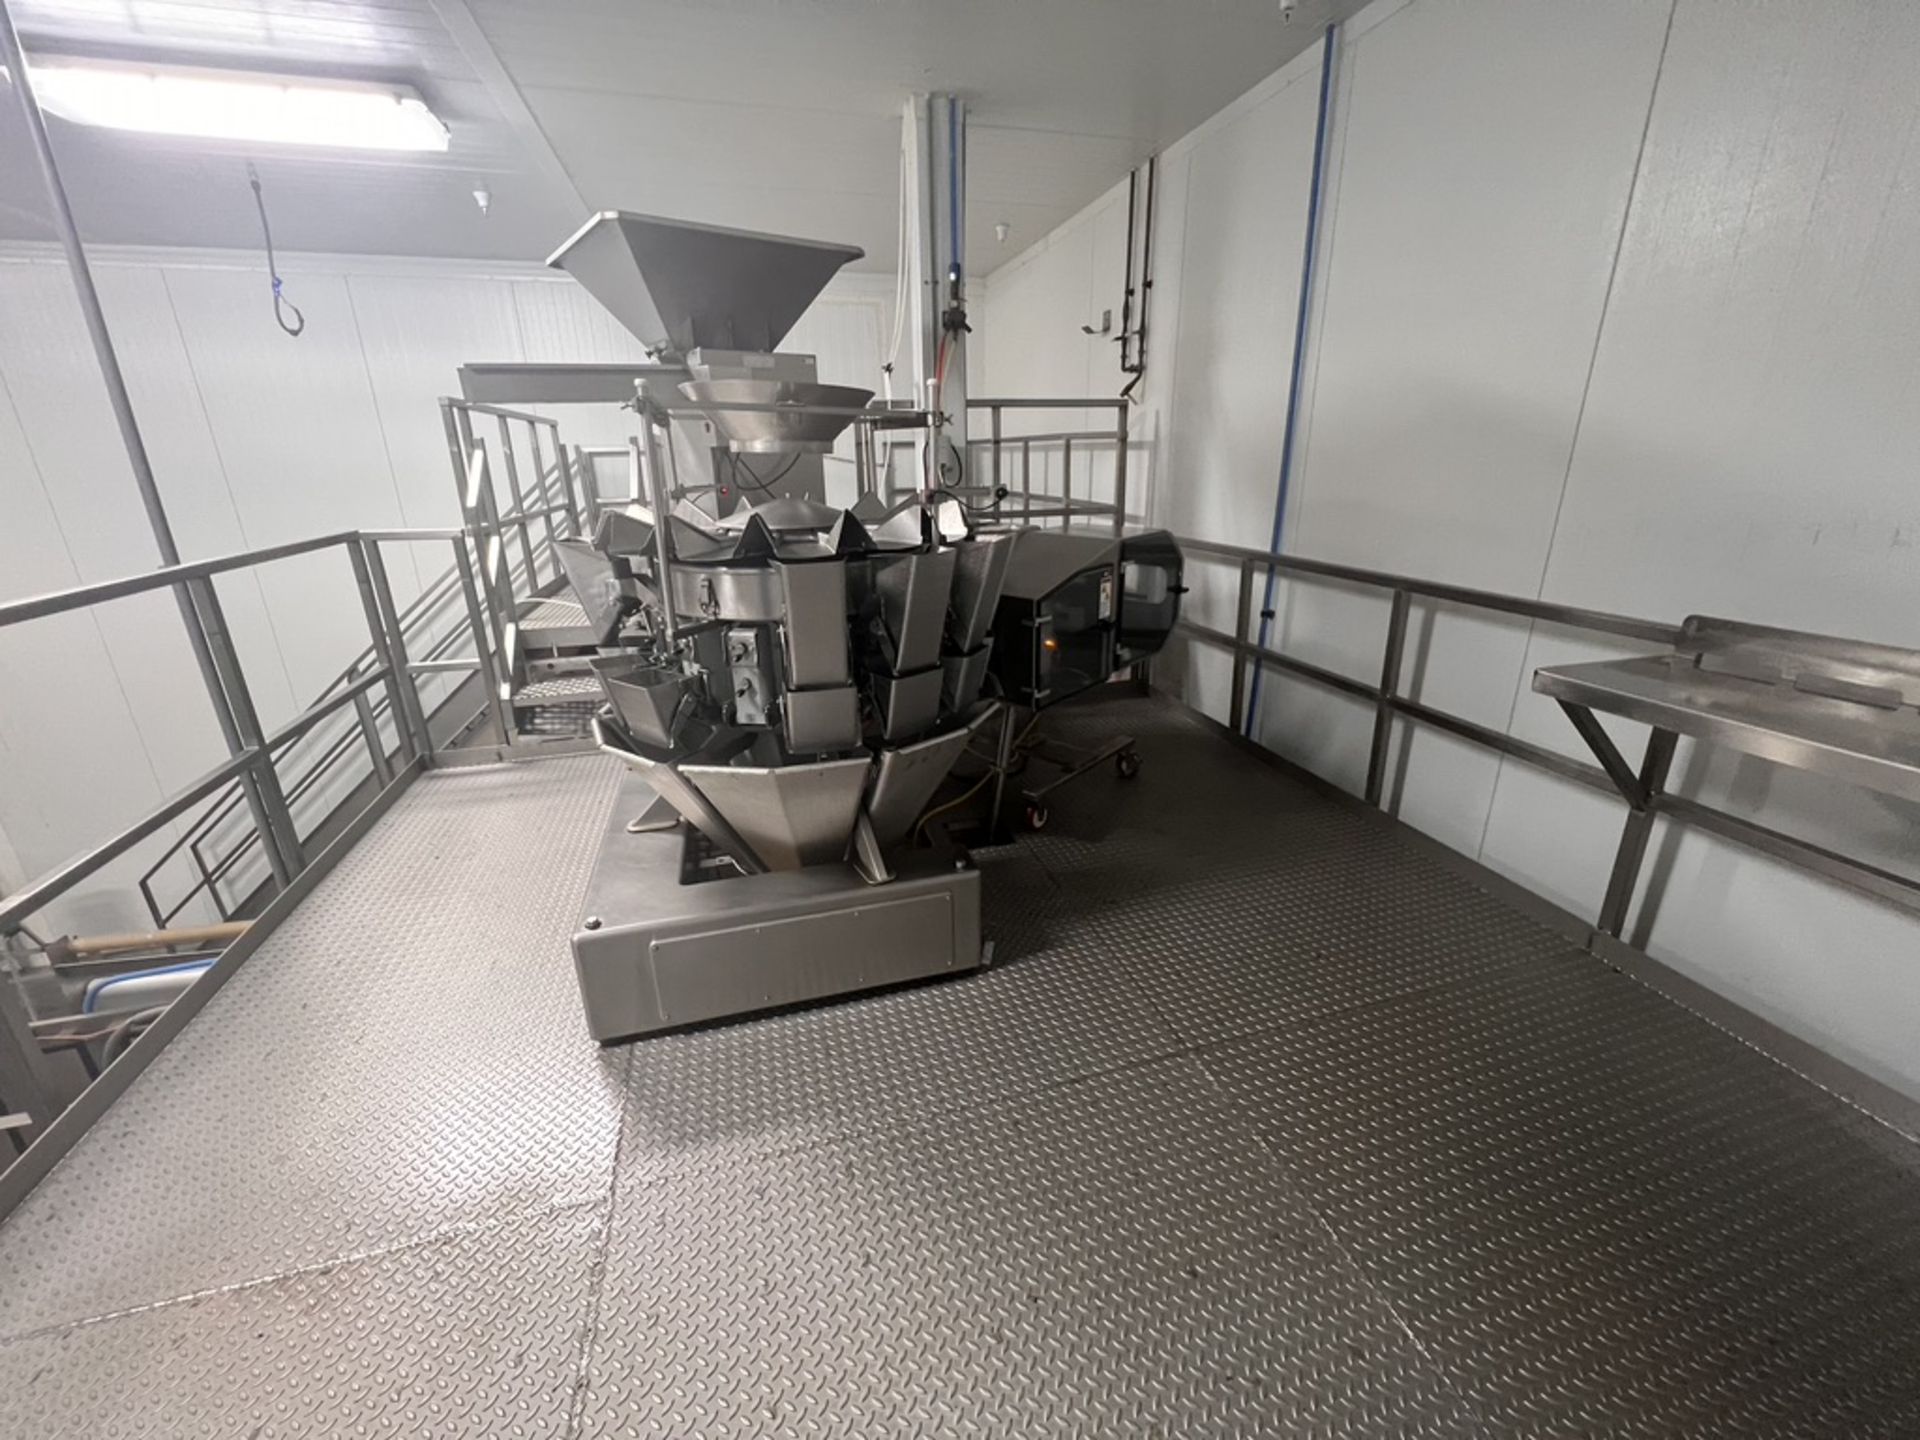 VC999 14-HEAD MULTI-WEIGHER, MODEL MULTIHEAD WEIGHER (SUBJECT TO BULK BID) - Image 7 of 8